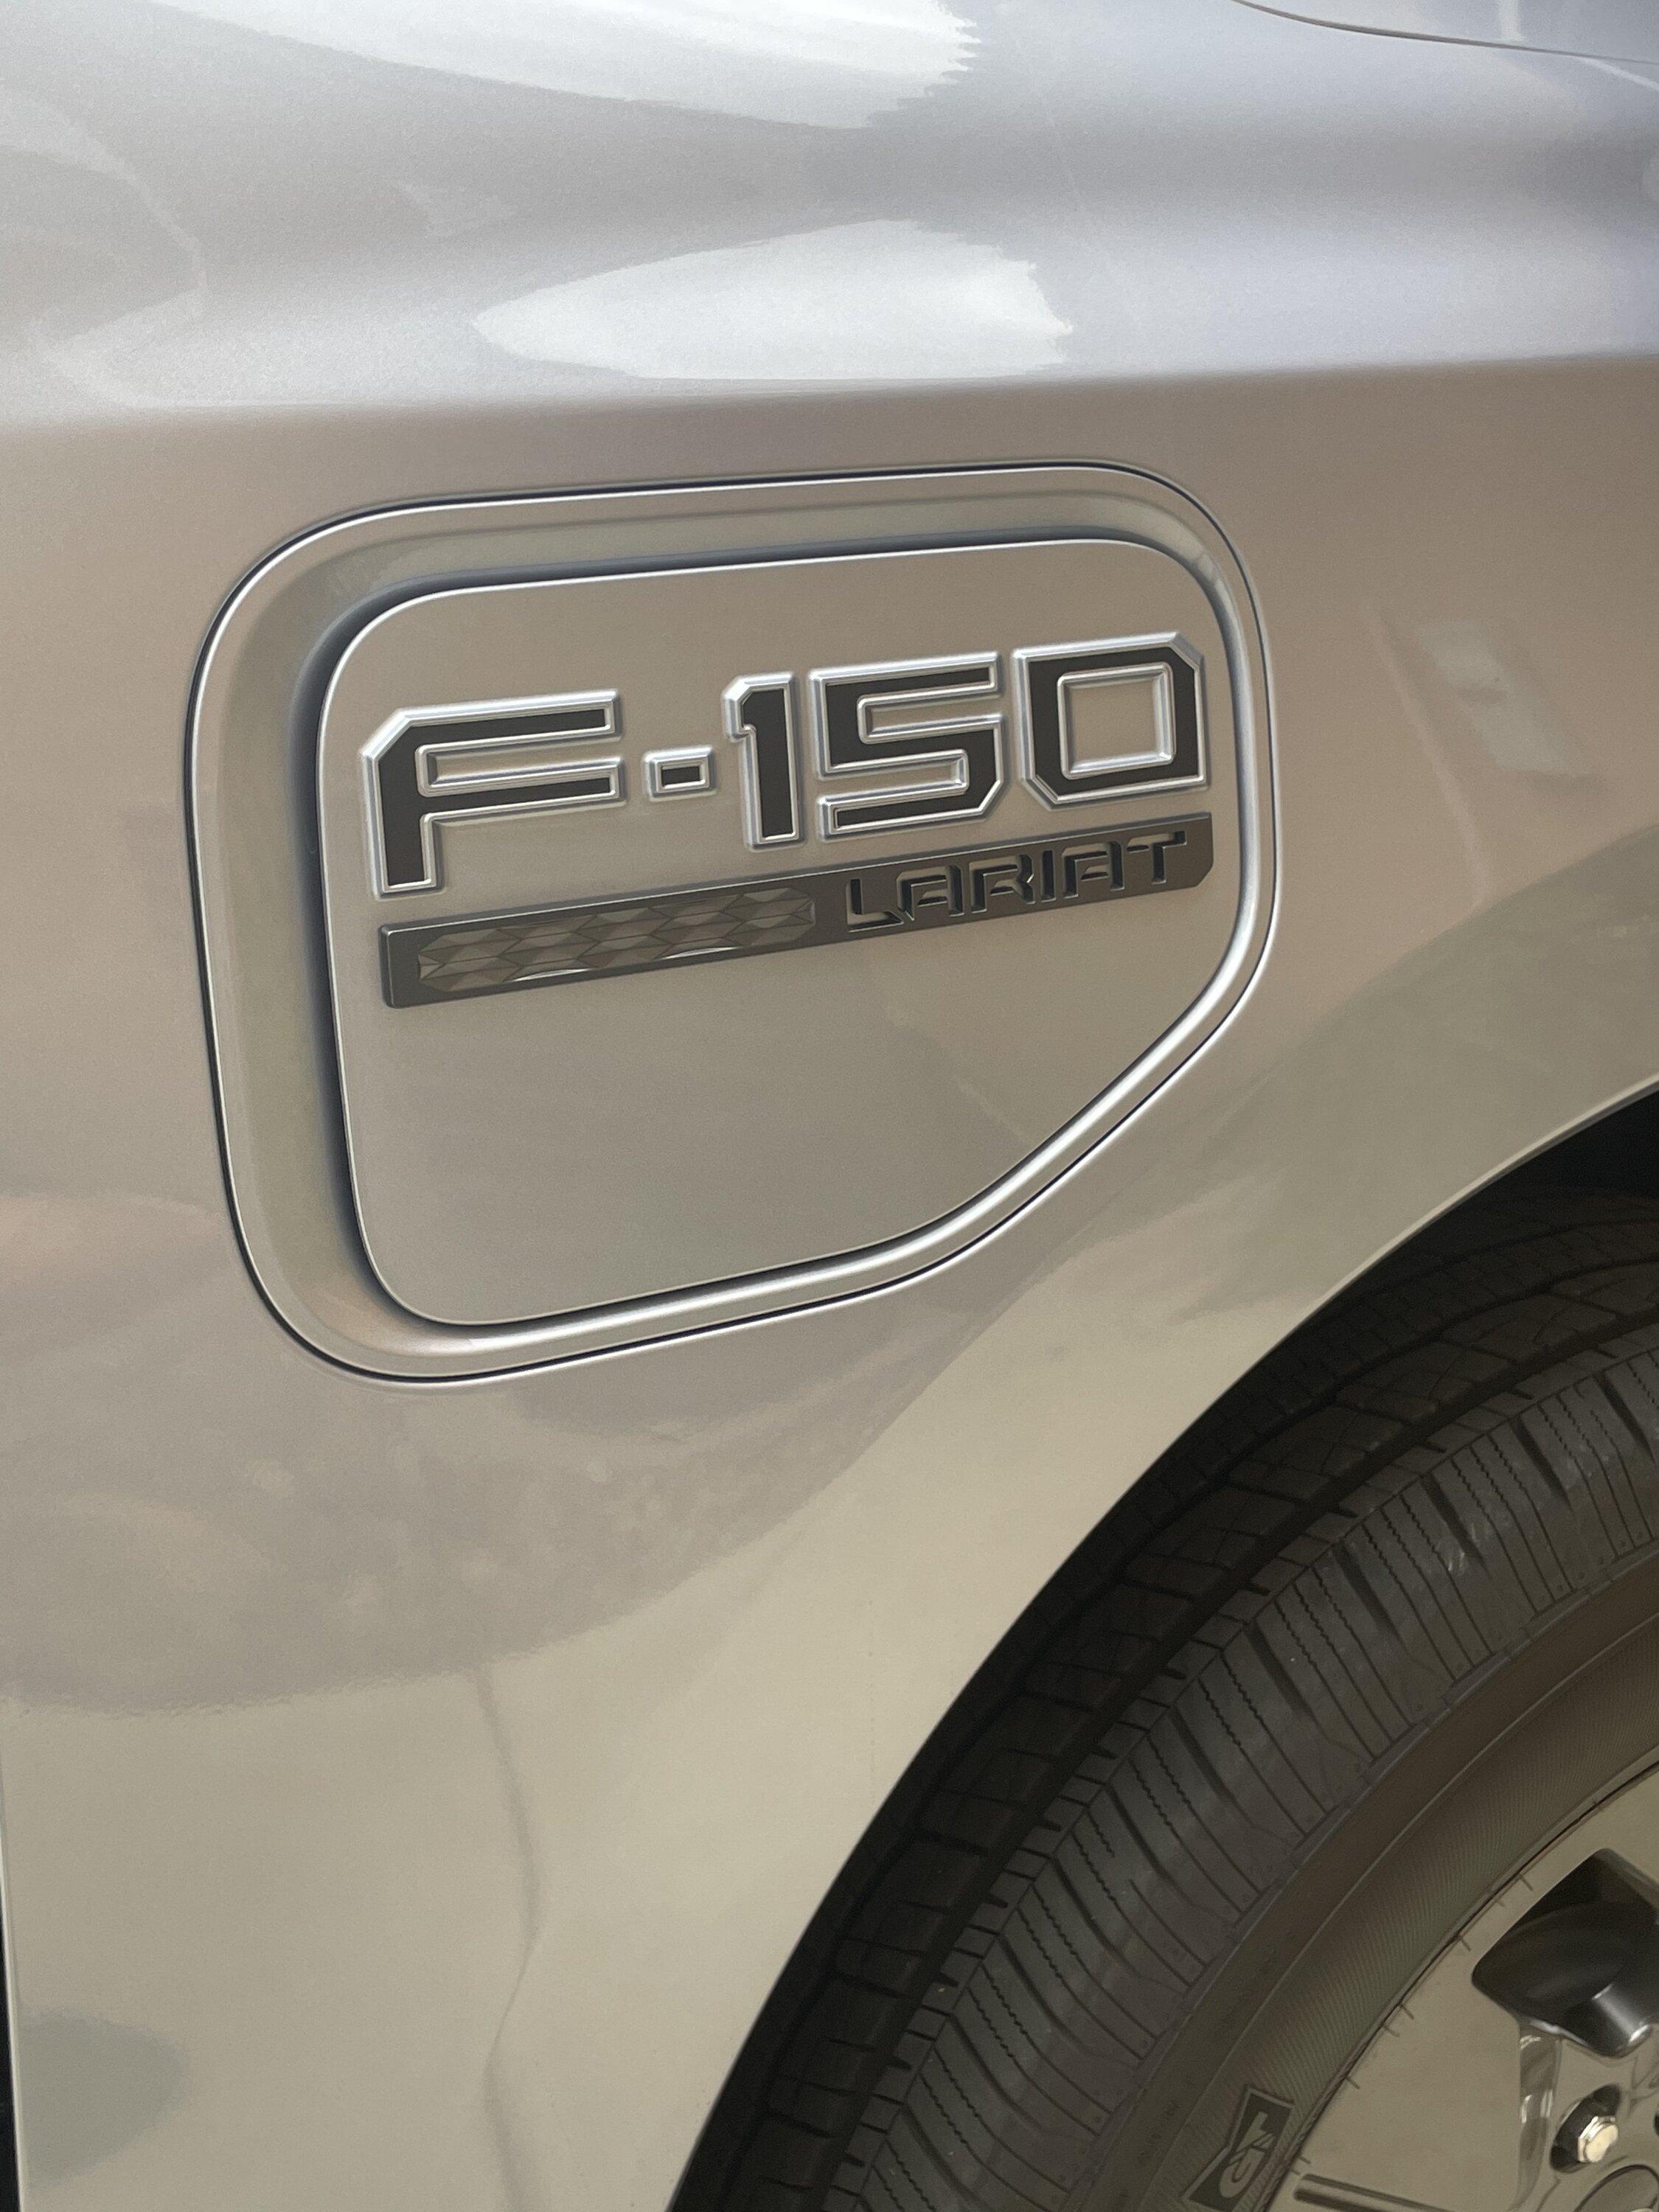 Ford F-150 Lightning 🙋‍♂️ What Did You Do To Your Lightning Today? CEFF438D-B658-43C2-8CAA-FA4AEC12BE01